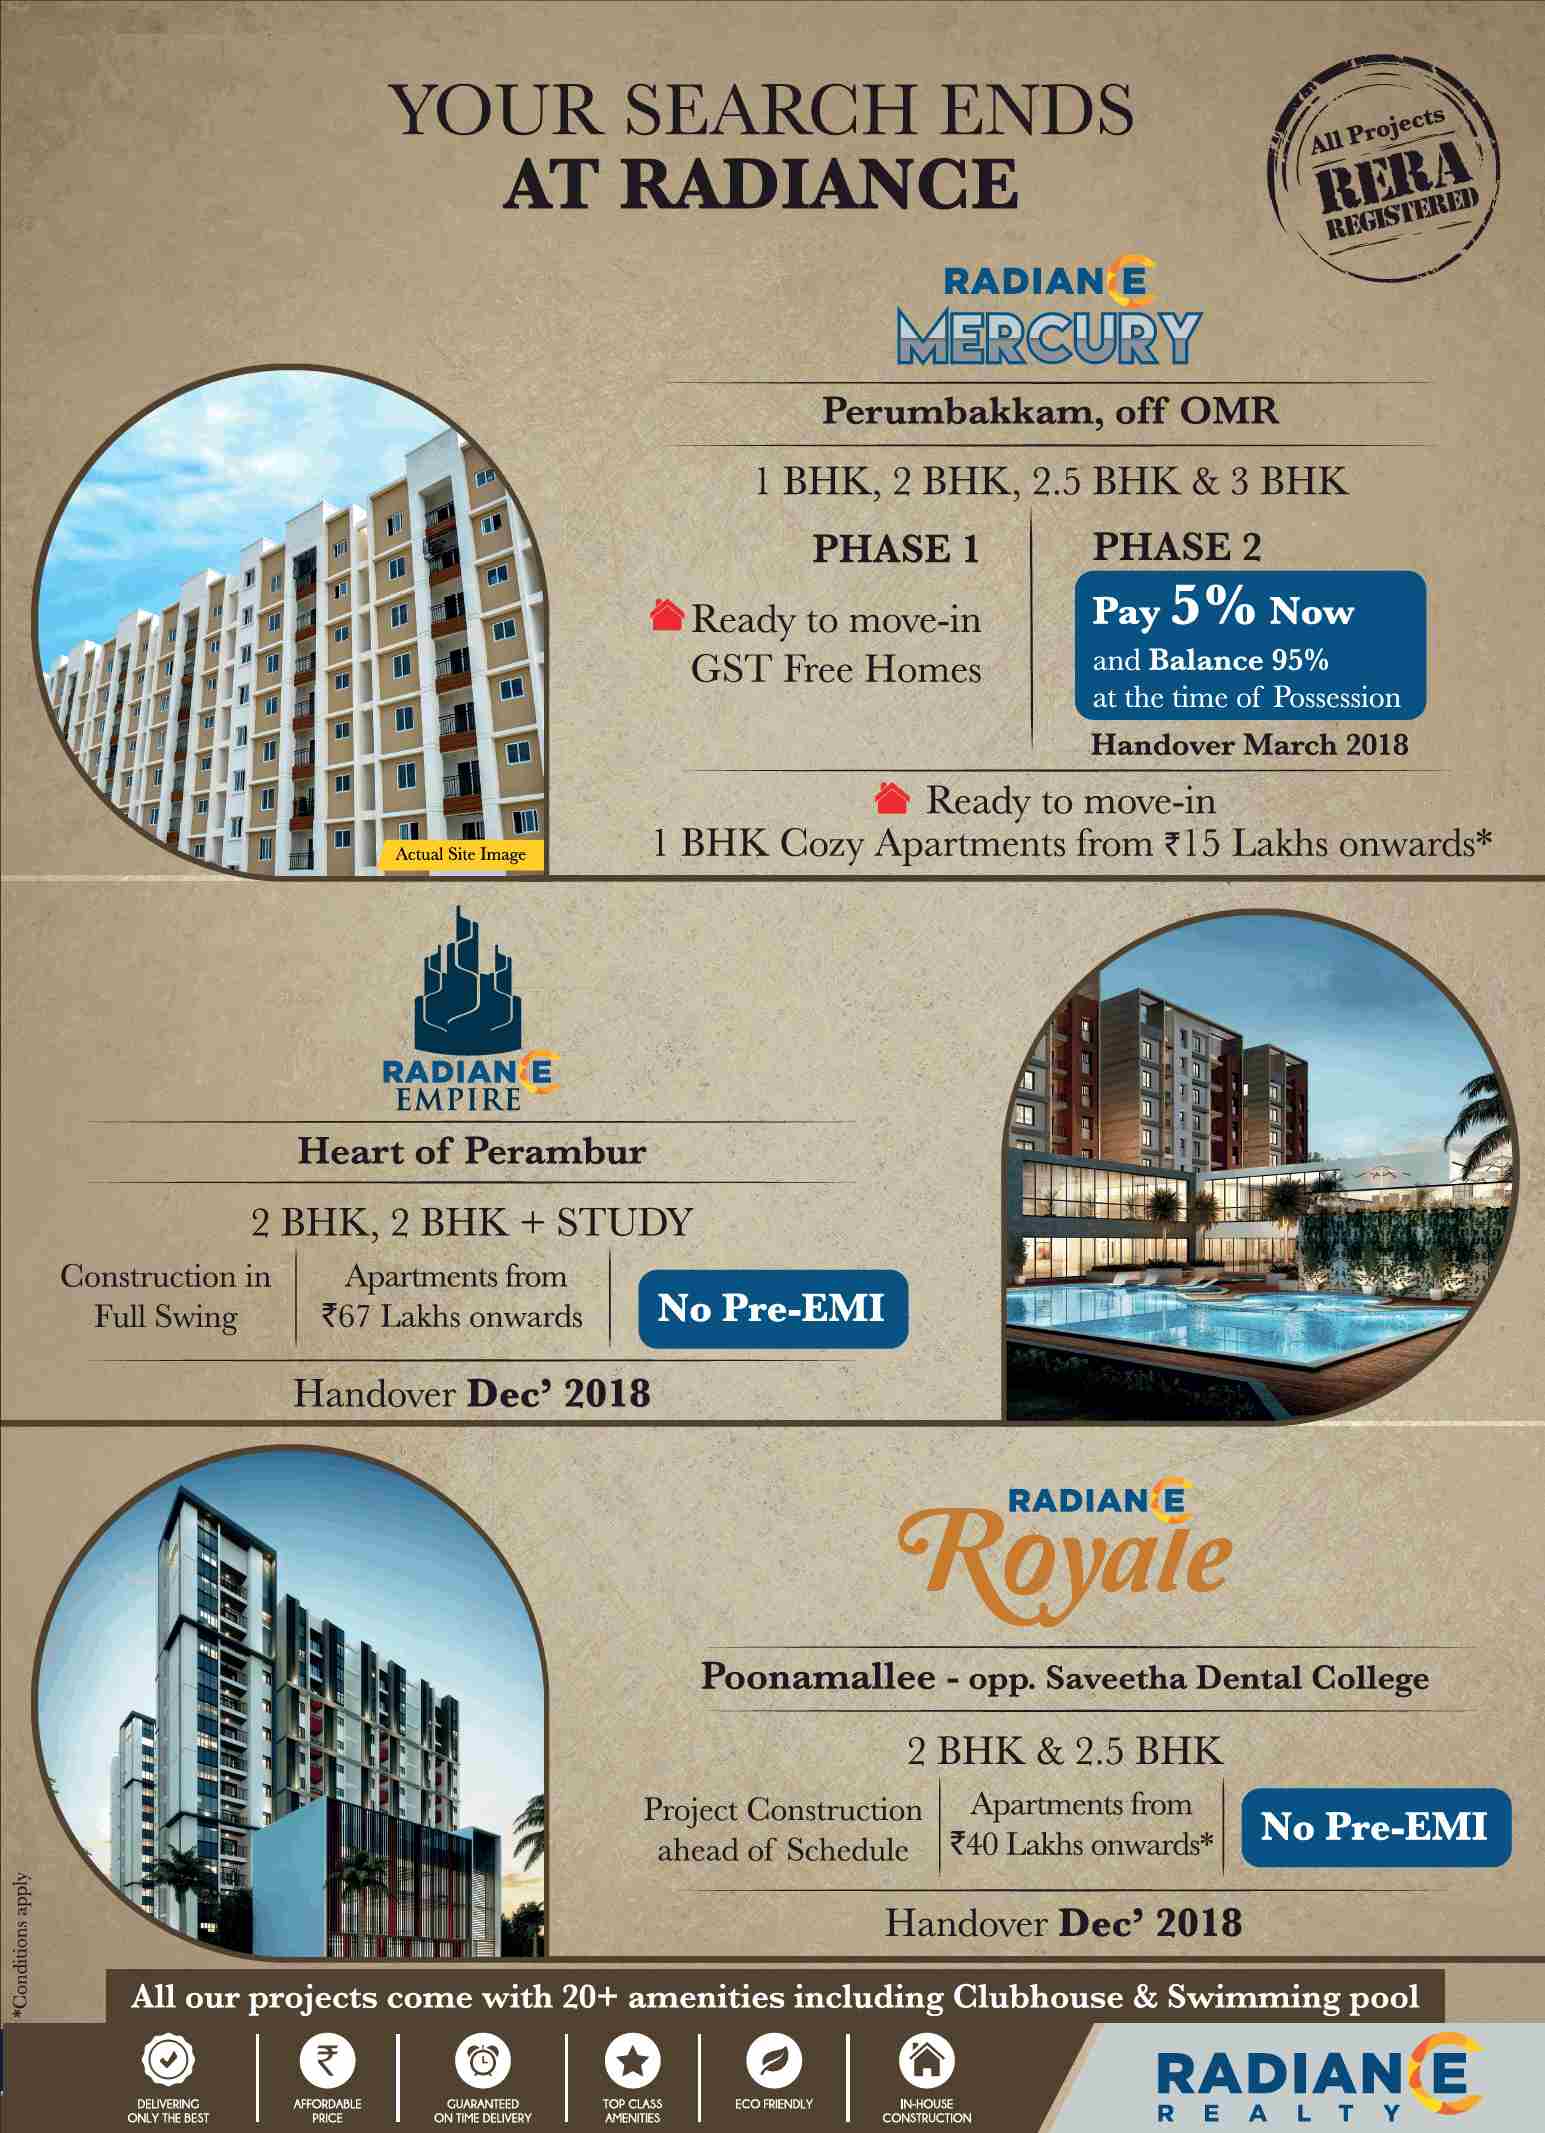 Invest on Radiance properties in Chennai